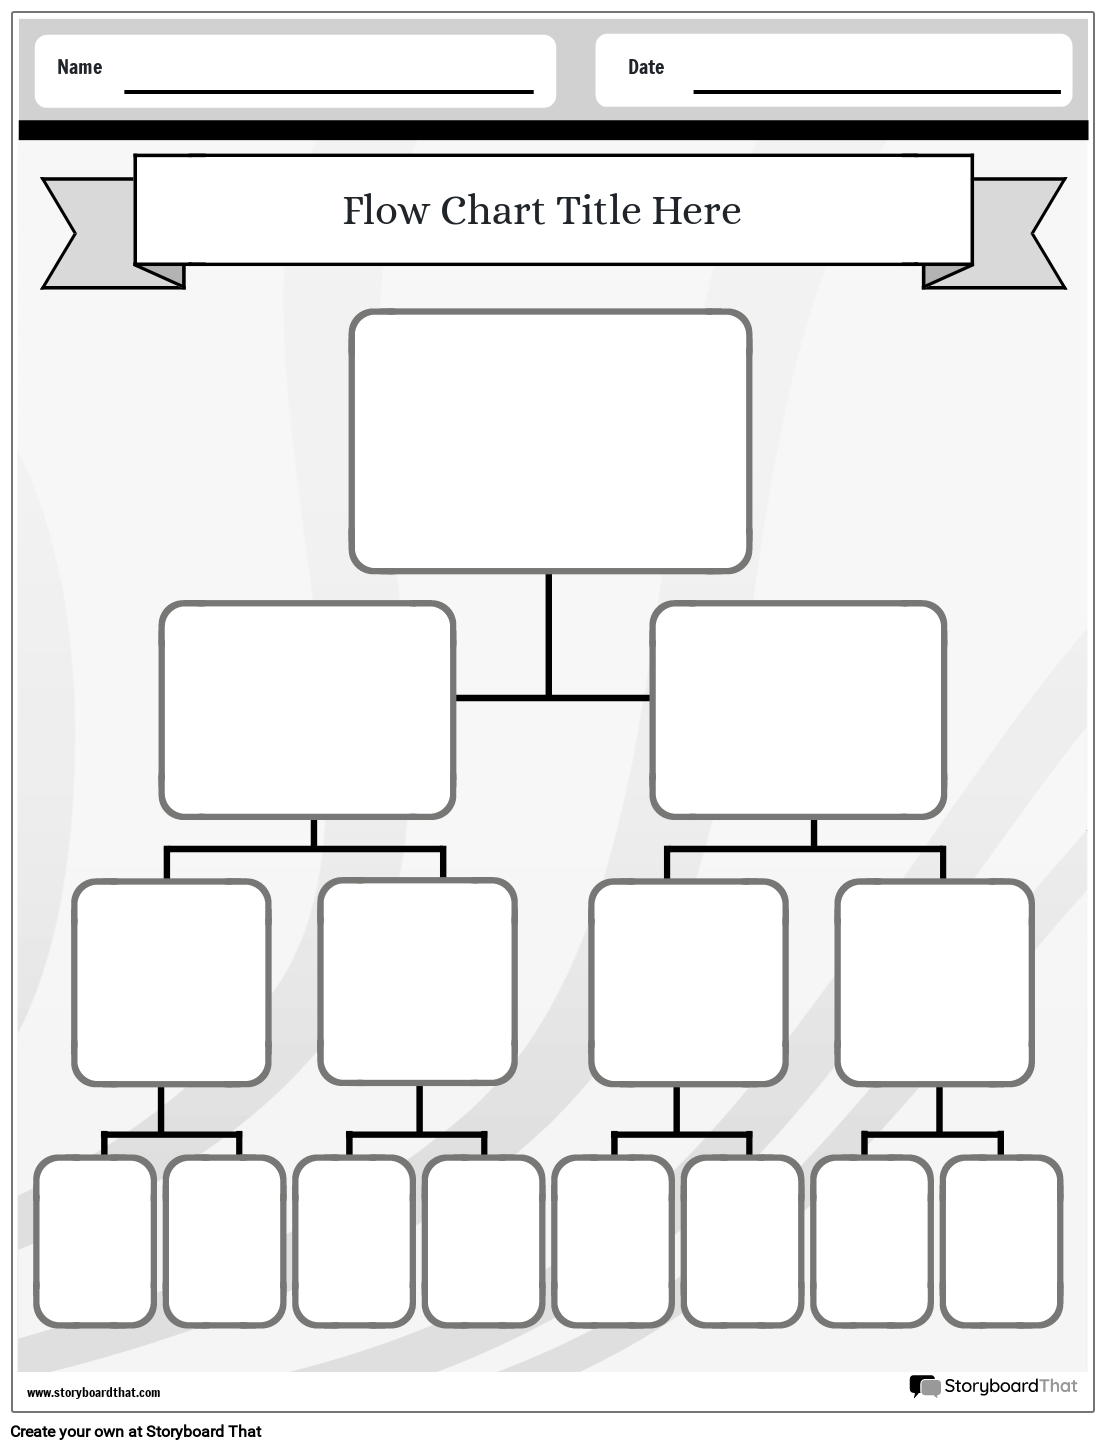 New Create Page Flow Chart Template 1 (Black & White)